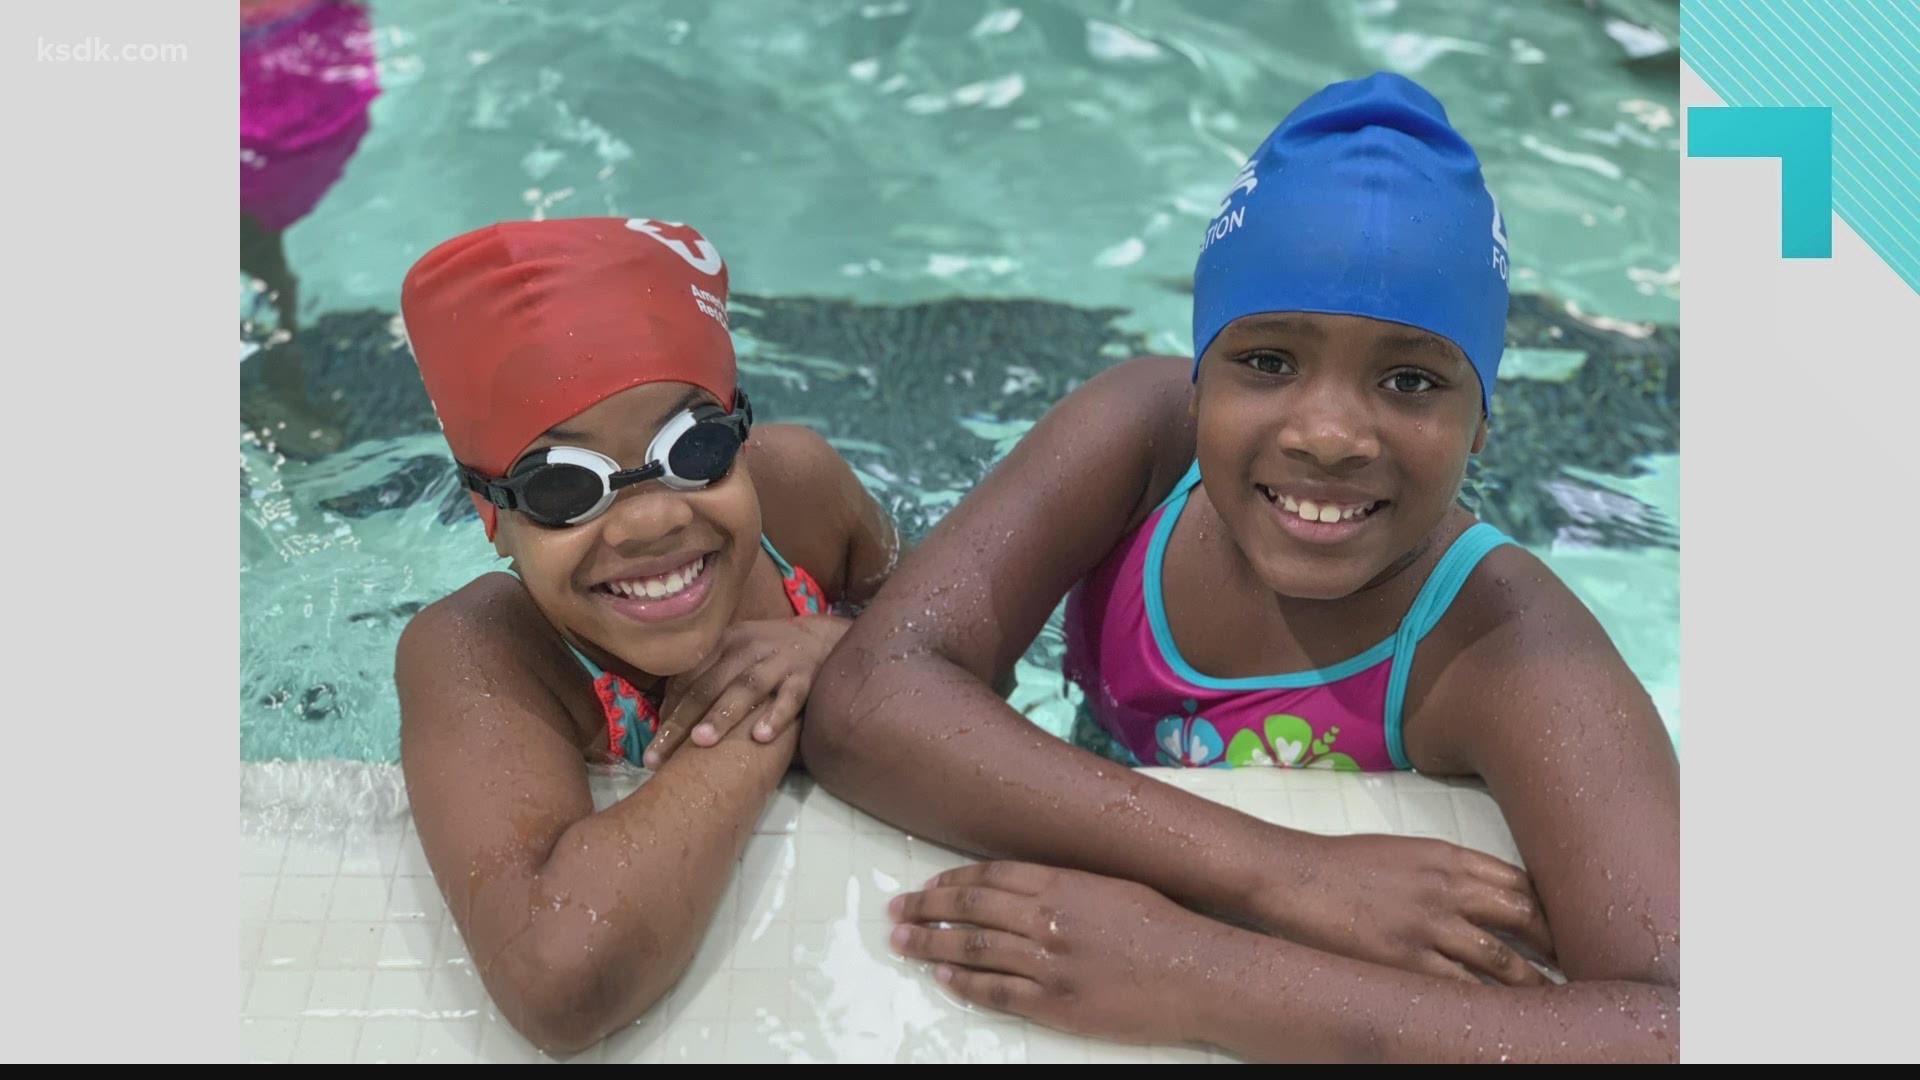 Summer camp can be both fun and educational with the Boys & Girls Clubs of Greater St. Louis.